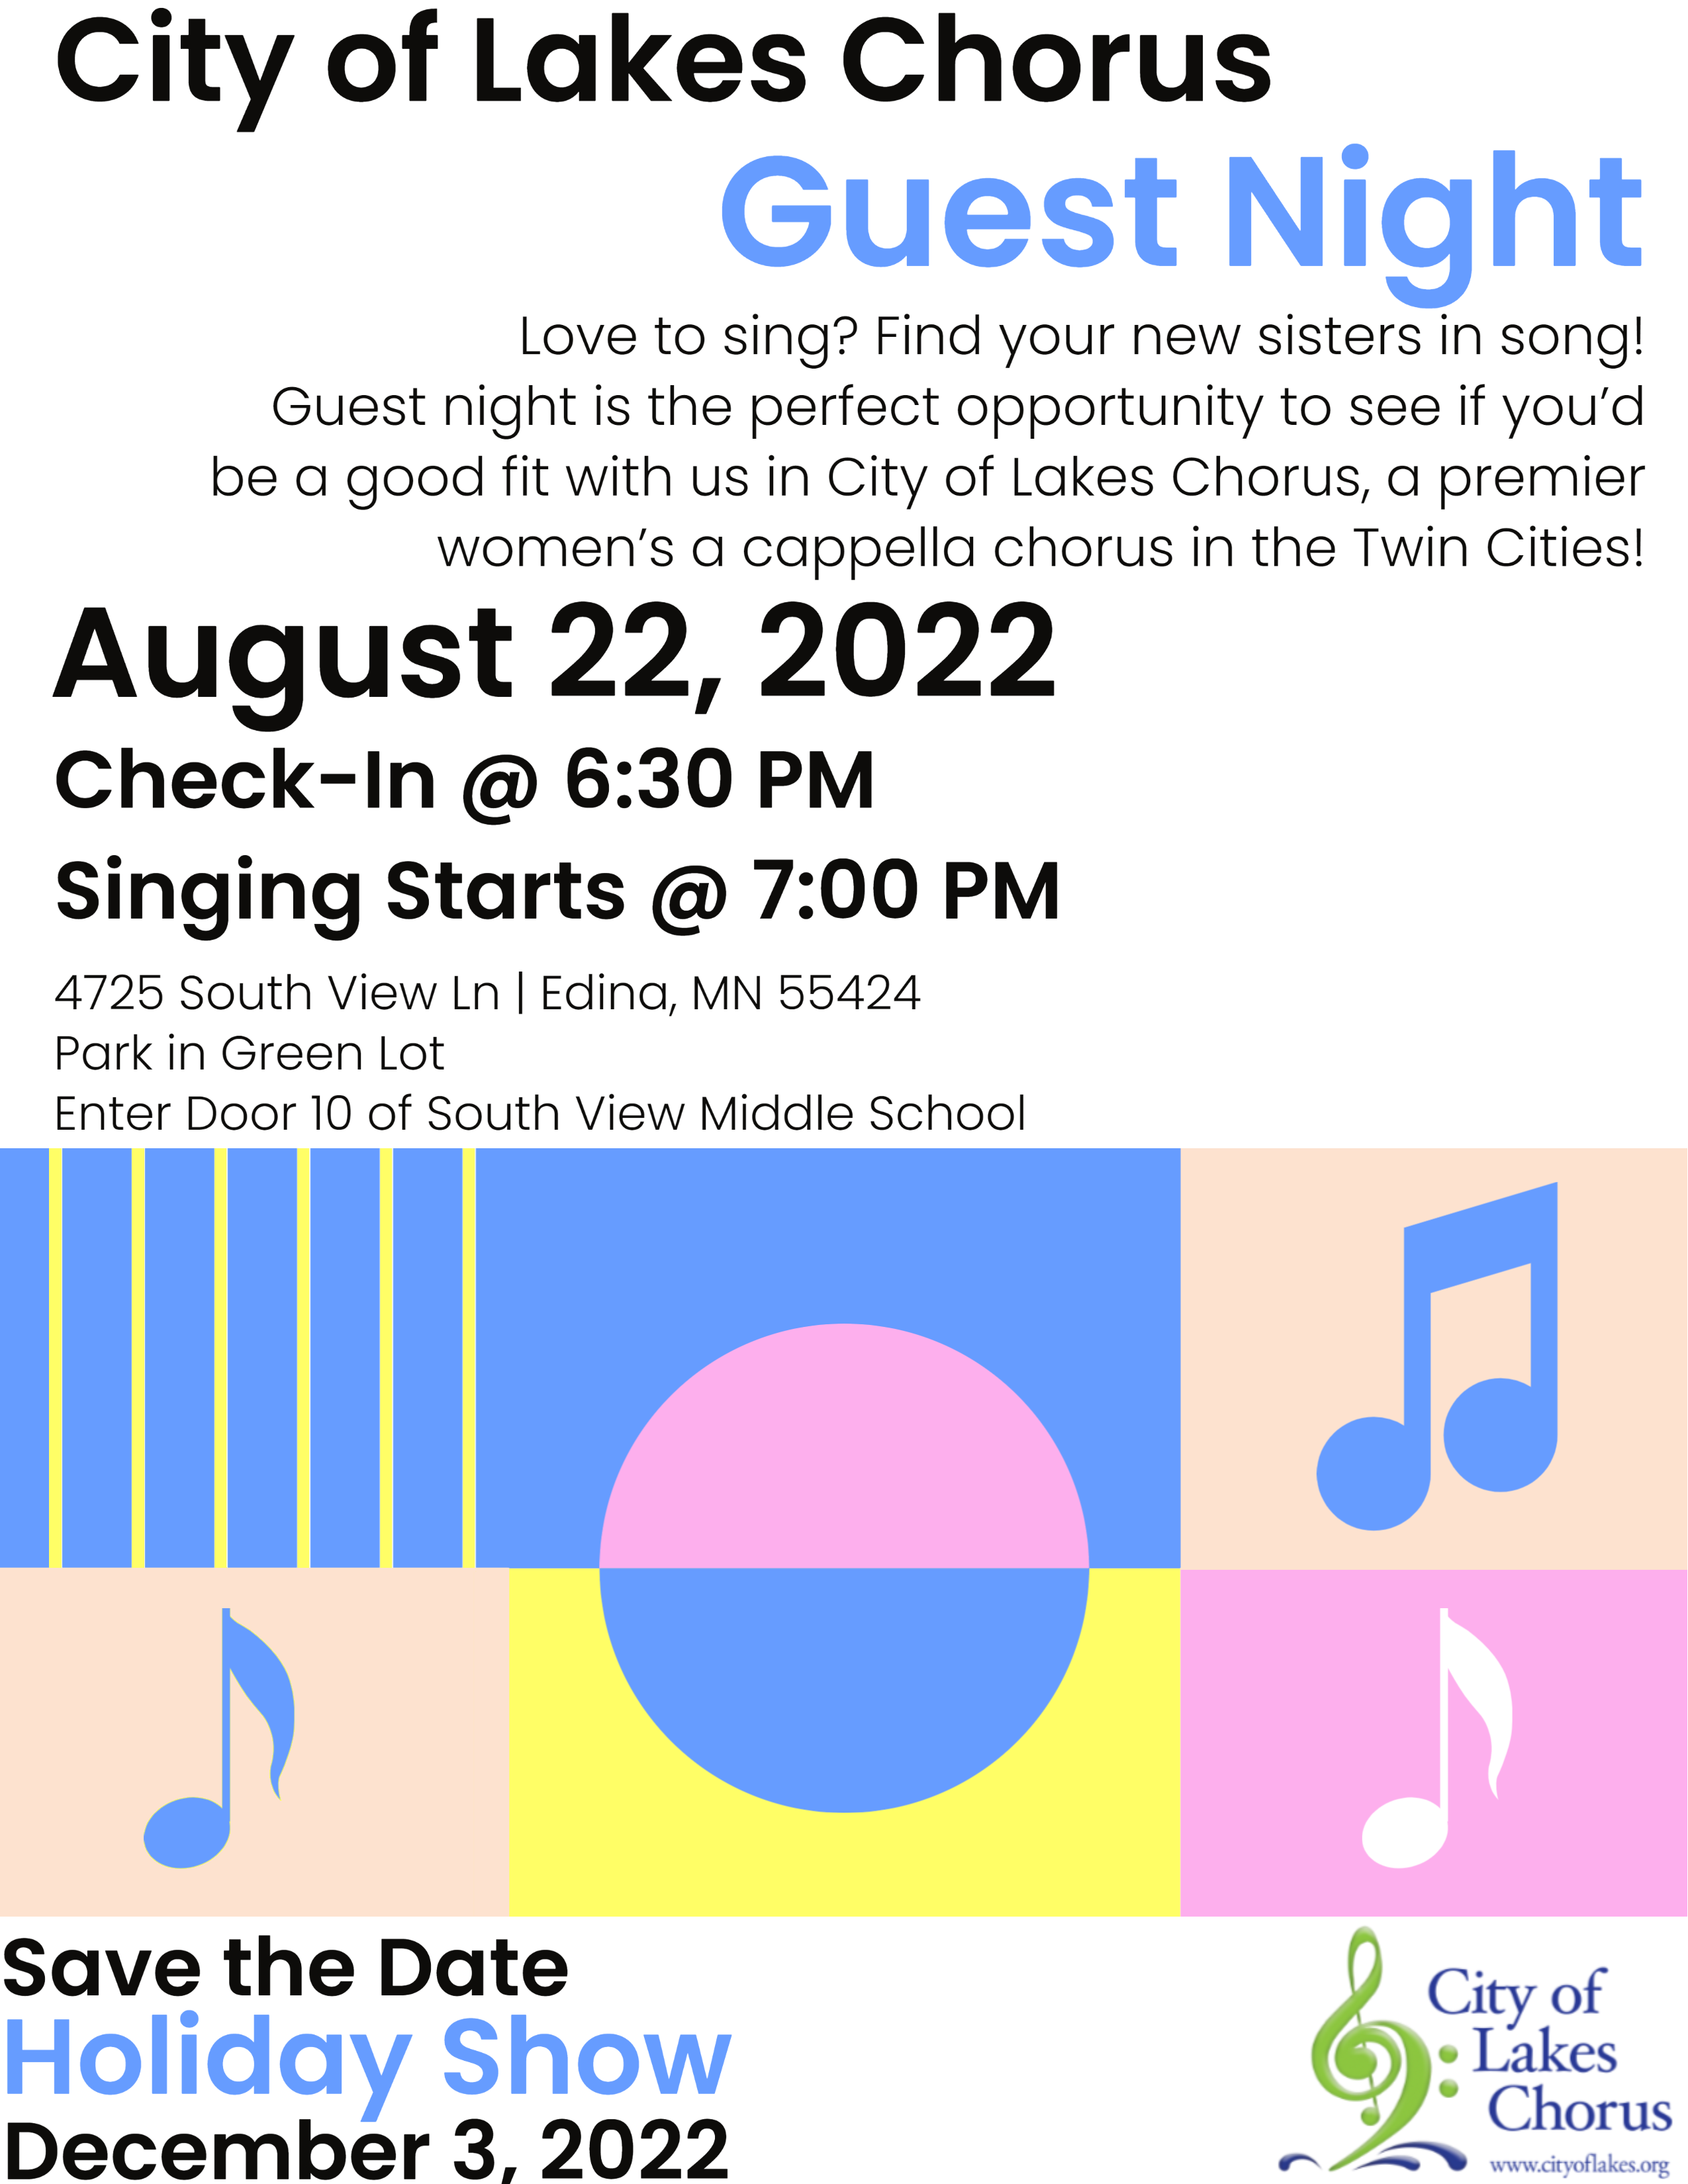 Join City of Lakes for Guest Night! Monday, August 22.